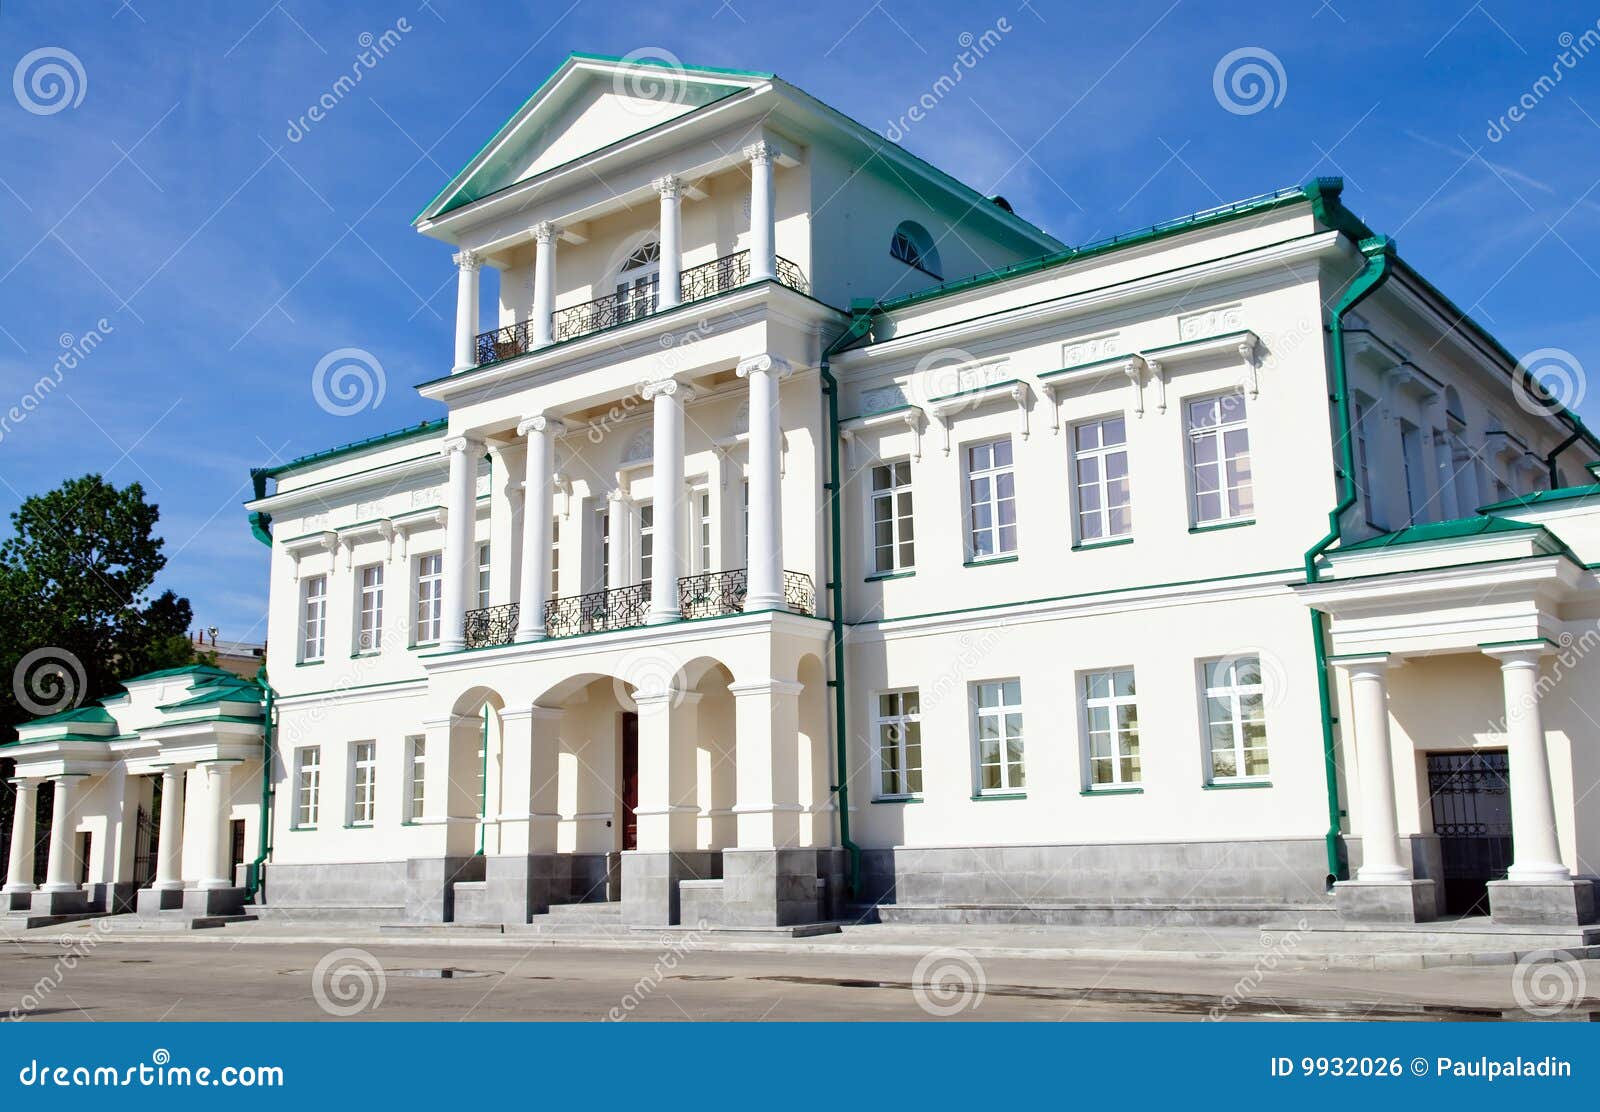 classicism style houses yekaterinburg